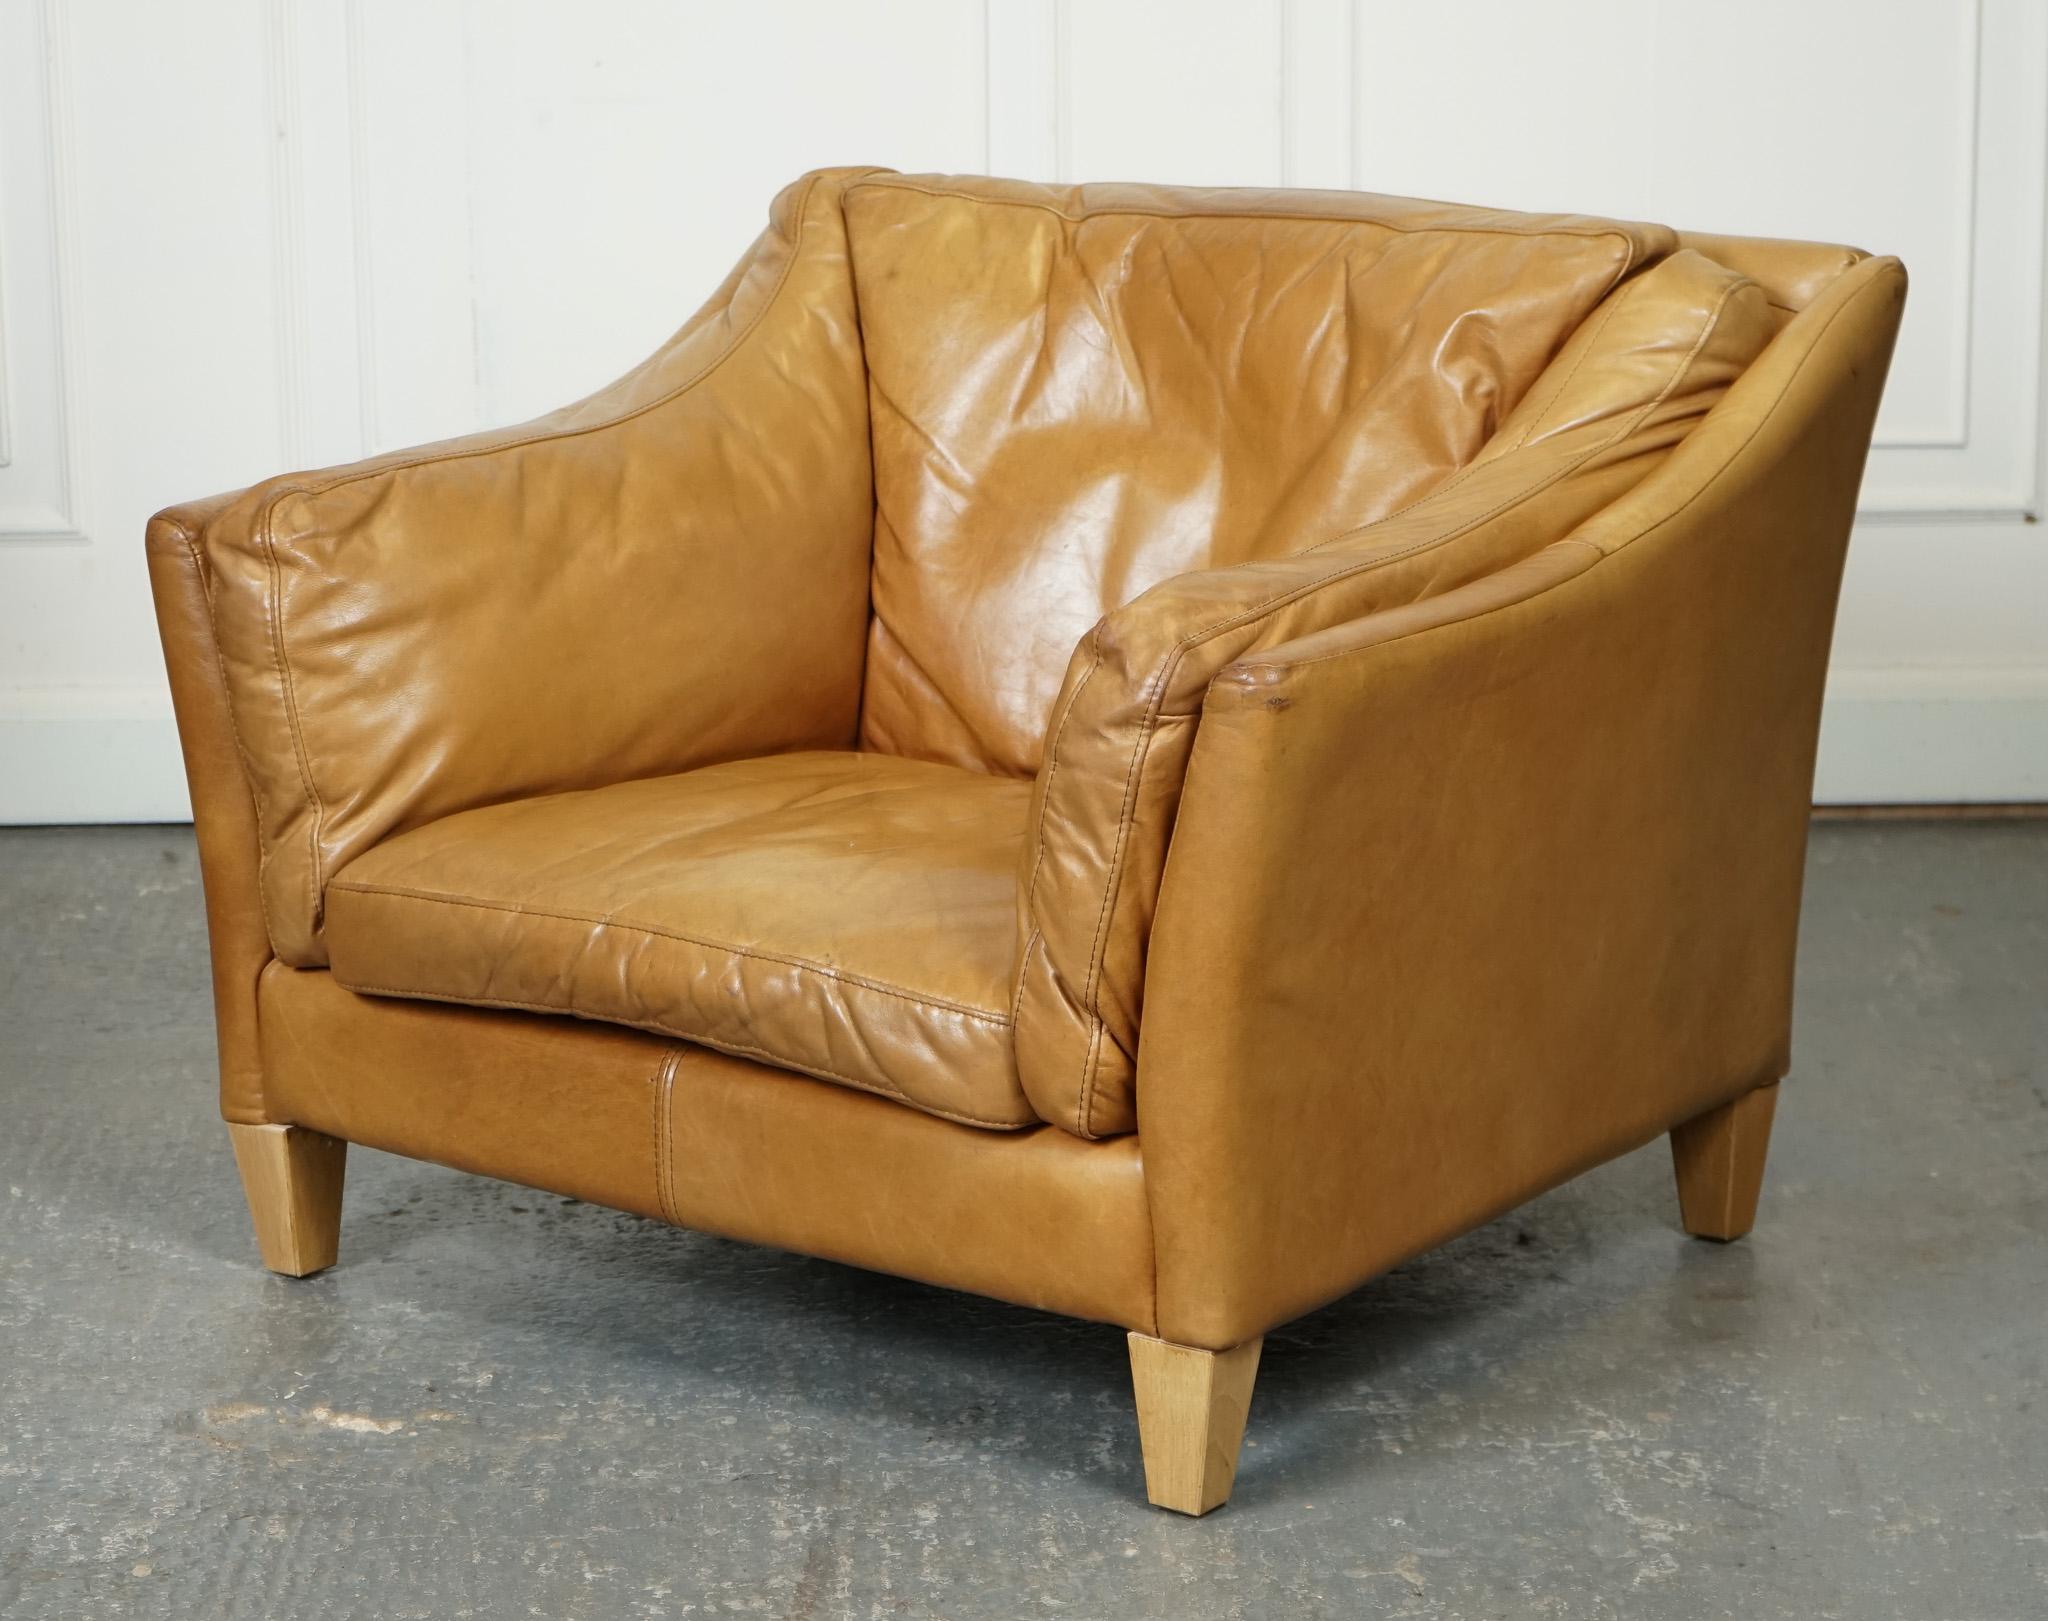 
We are delighted to offer for sale this Lovely Halo Reggio Tan Leather Armchair.

A compact and comfortable piece of furniture. Made with high-quality tan leather upholstery, this chair exudes a timeless and elegant look.

Despite its smaller size,